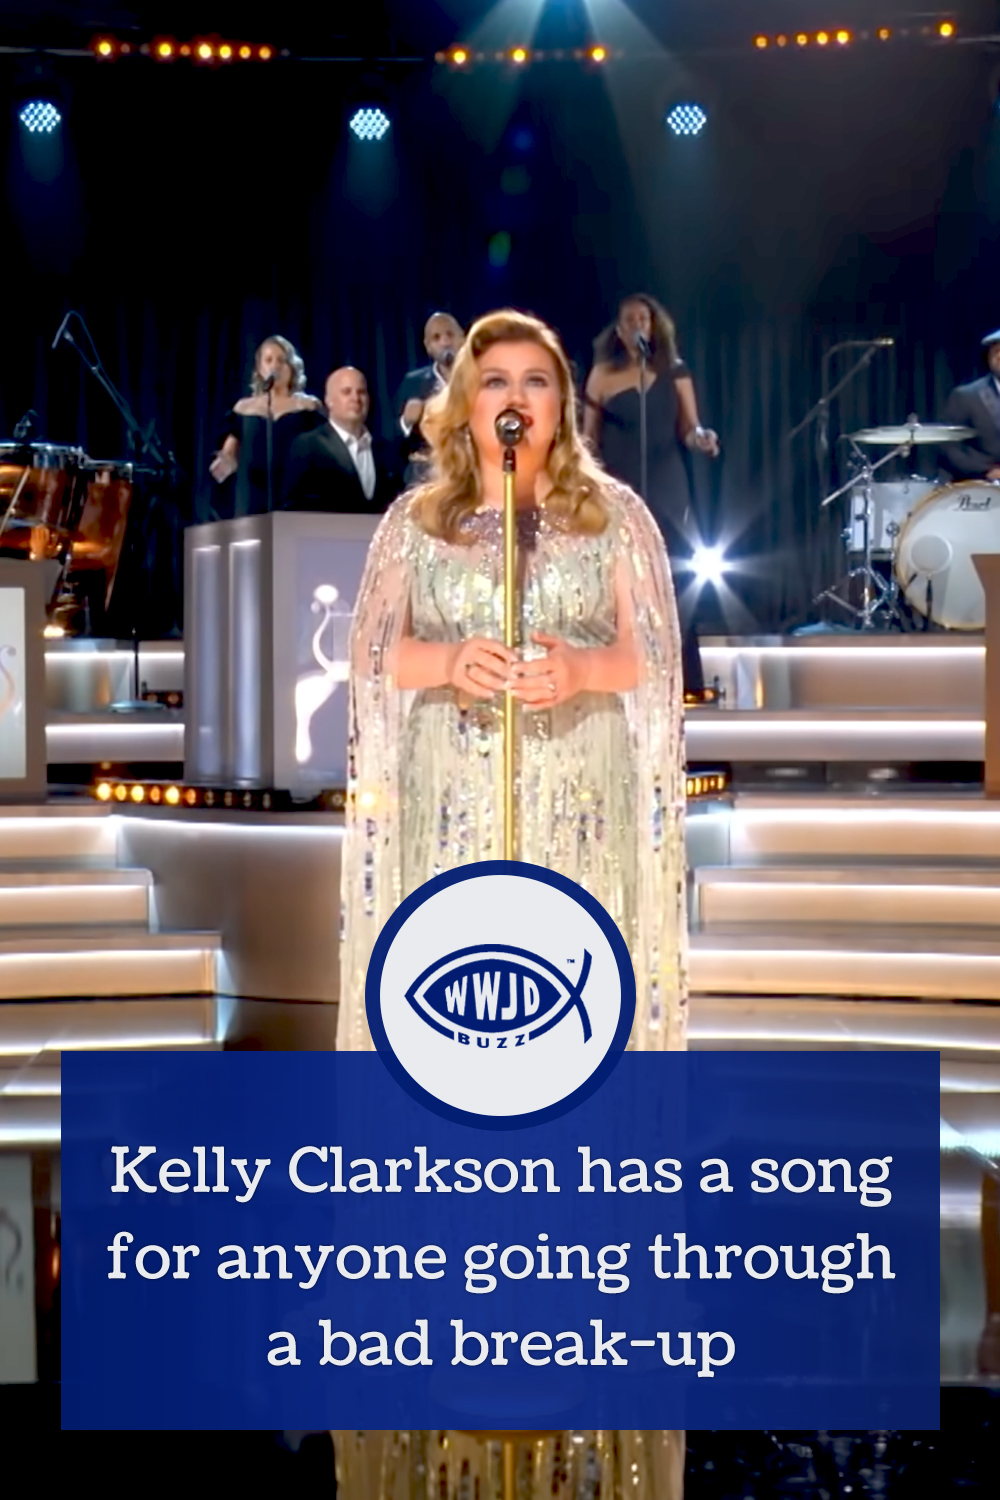 Kelly Clarkson has a song for anyone going through a bad break-up